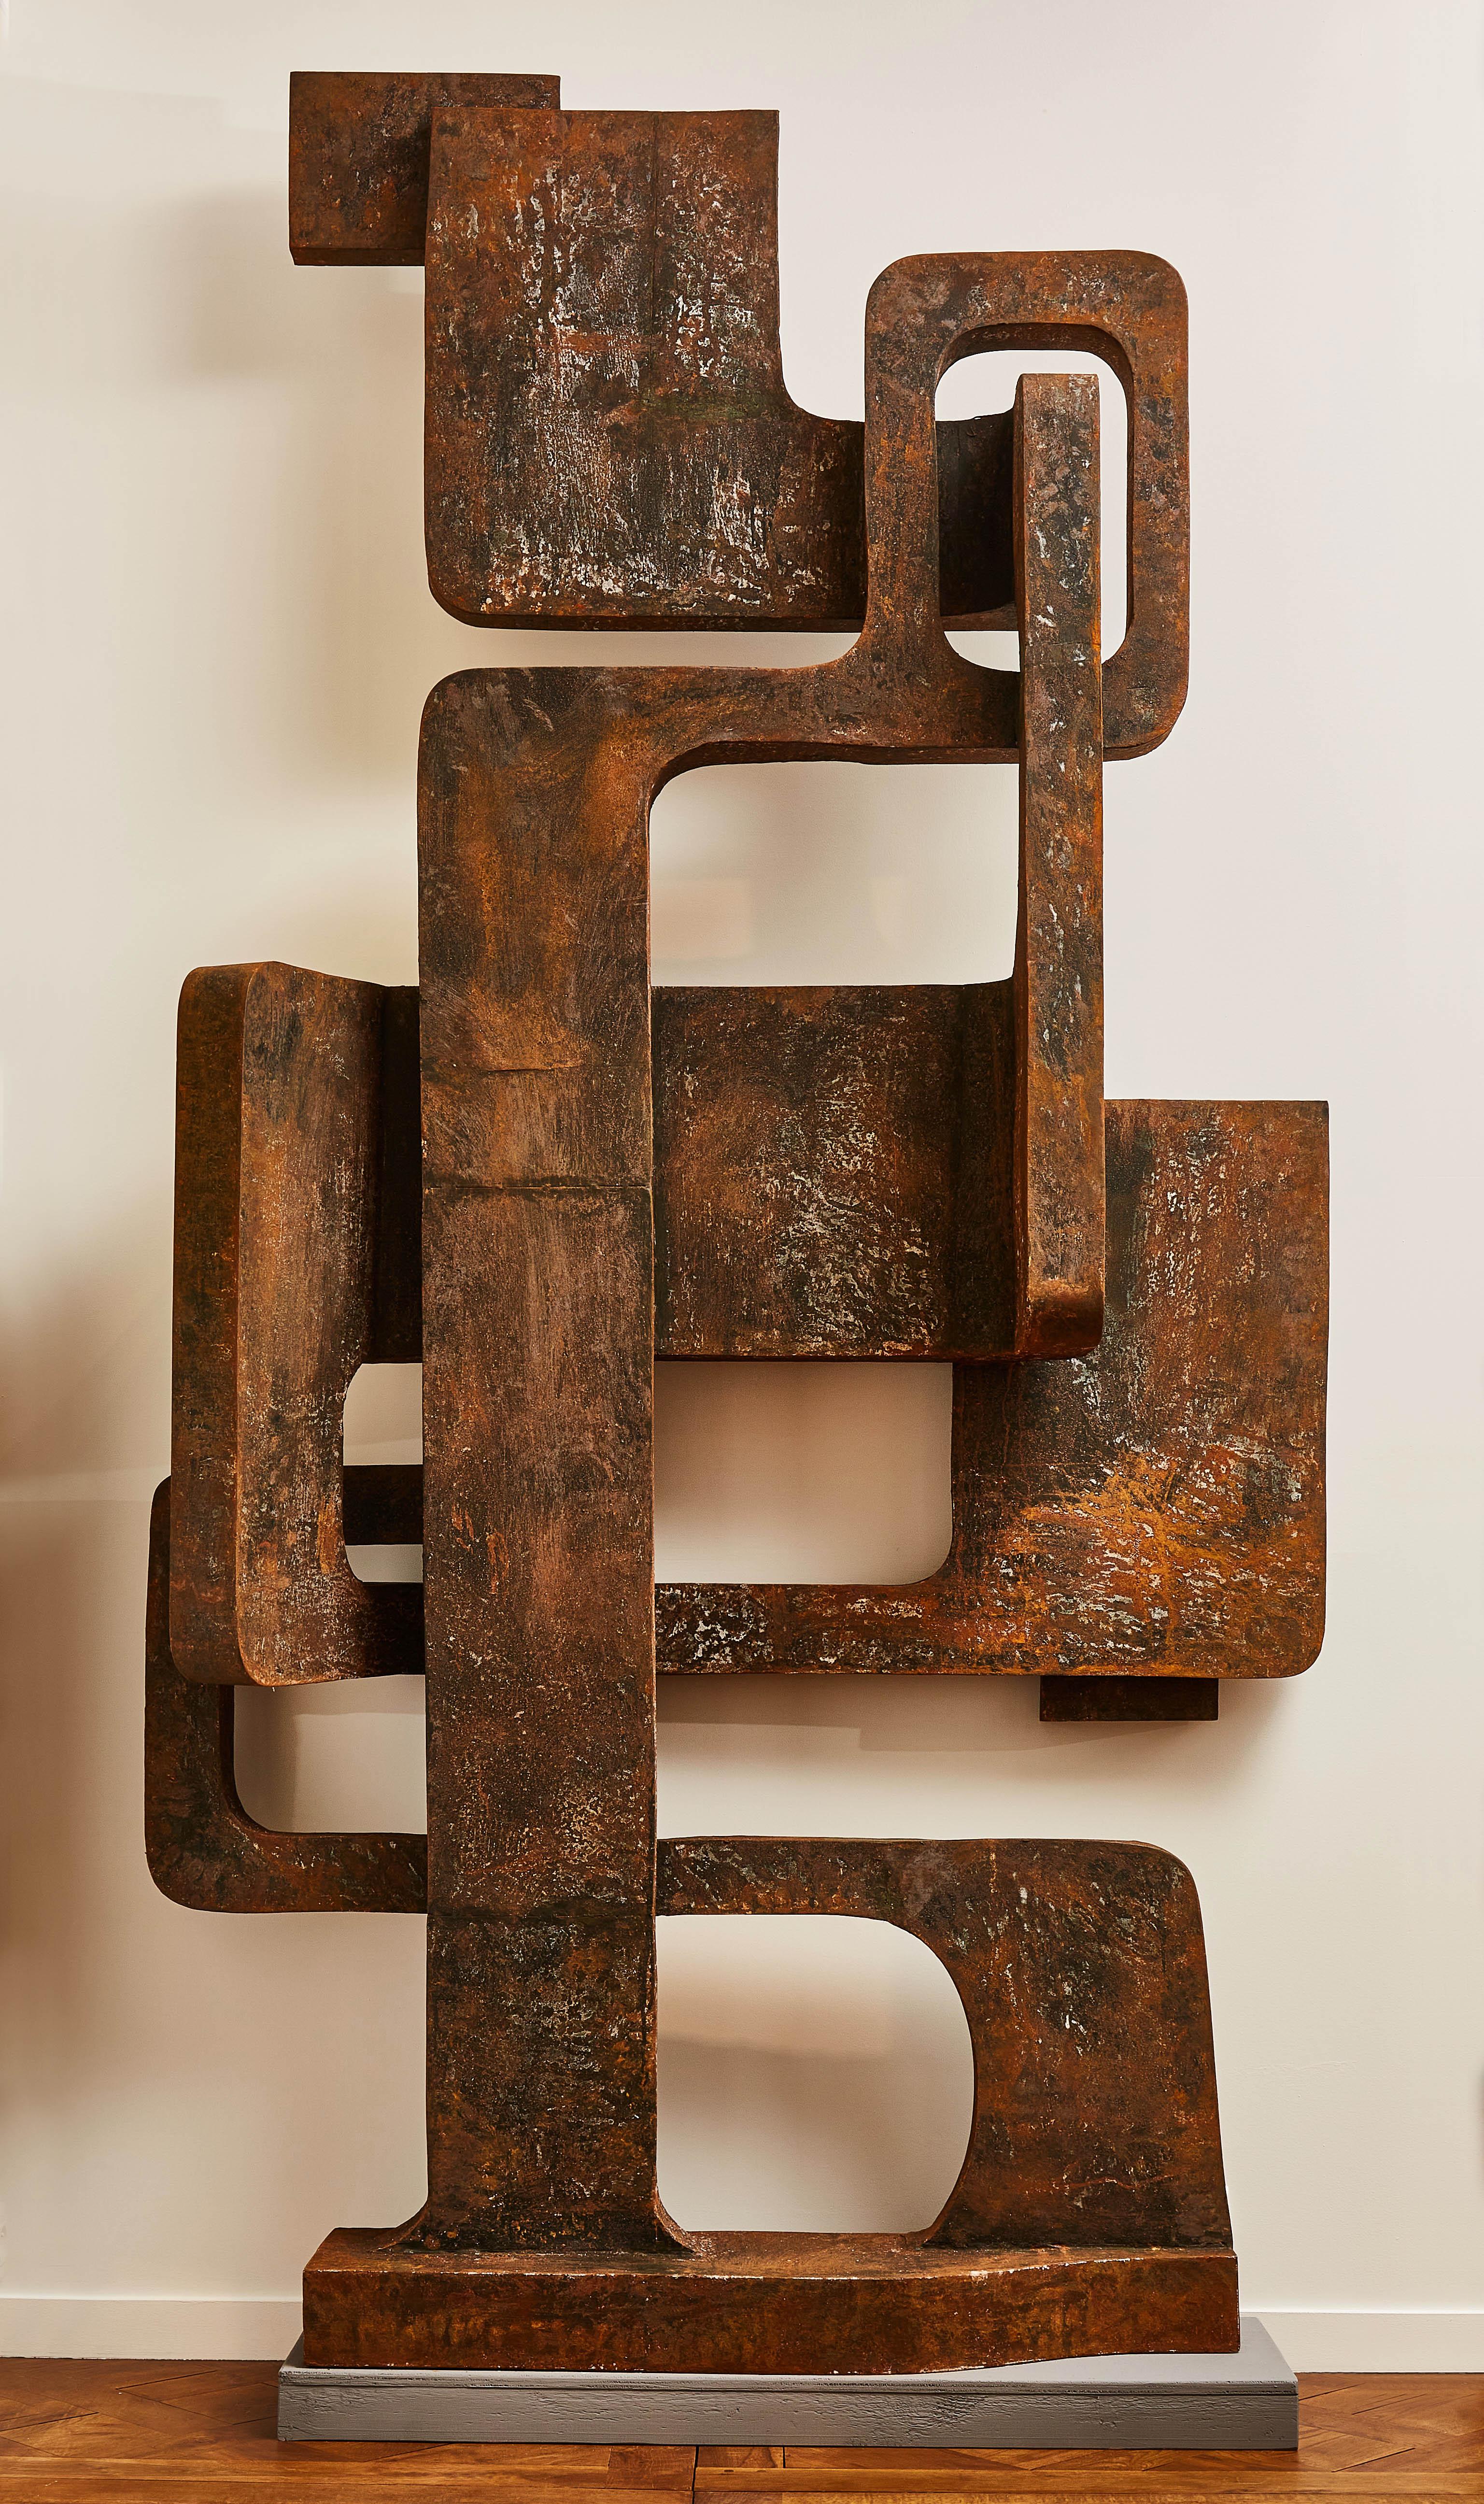 Vintage brutalist sculpture in metal. Signed piece by Tagashi, 1968.
(Pair available).